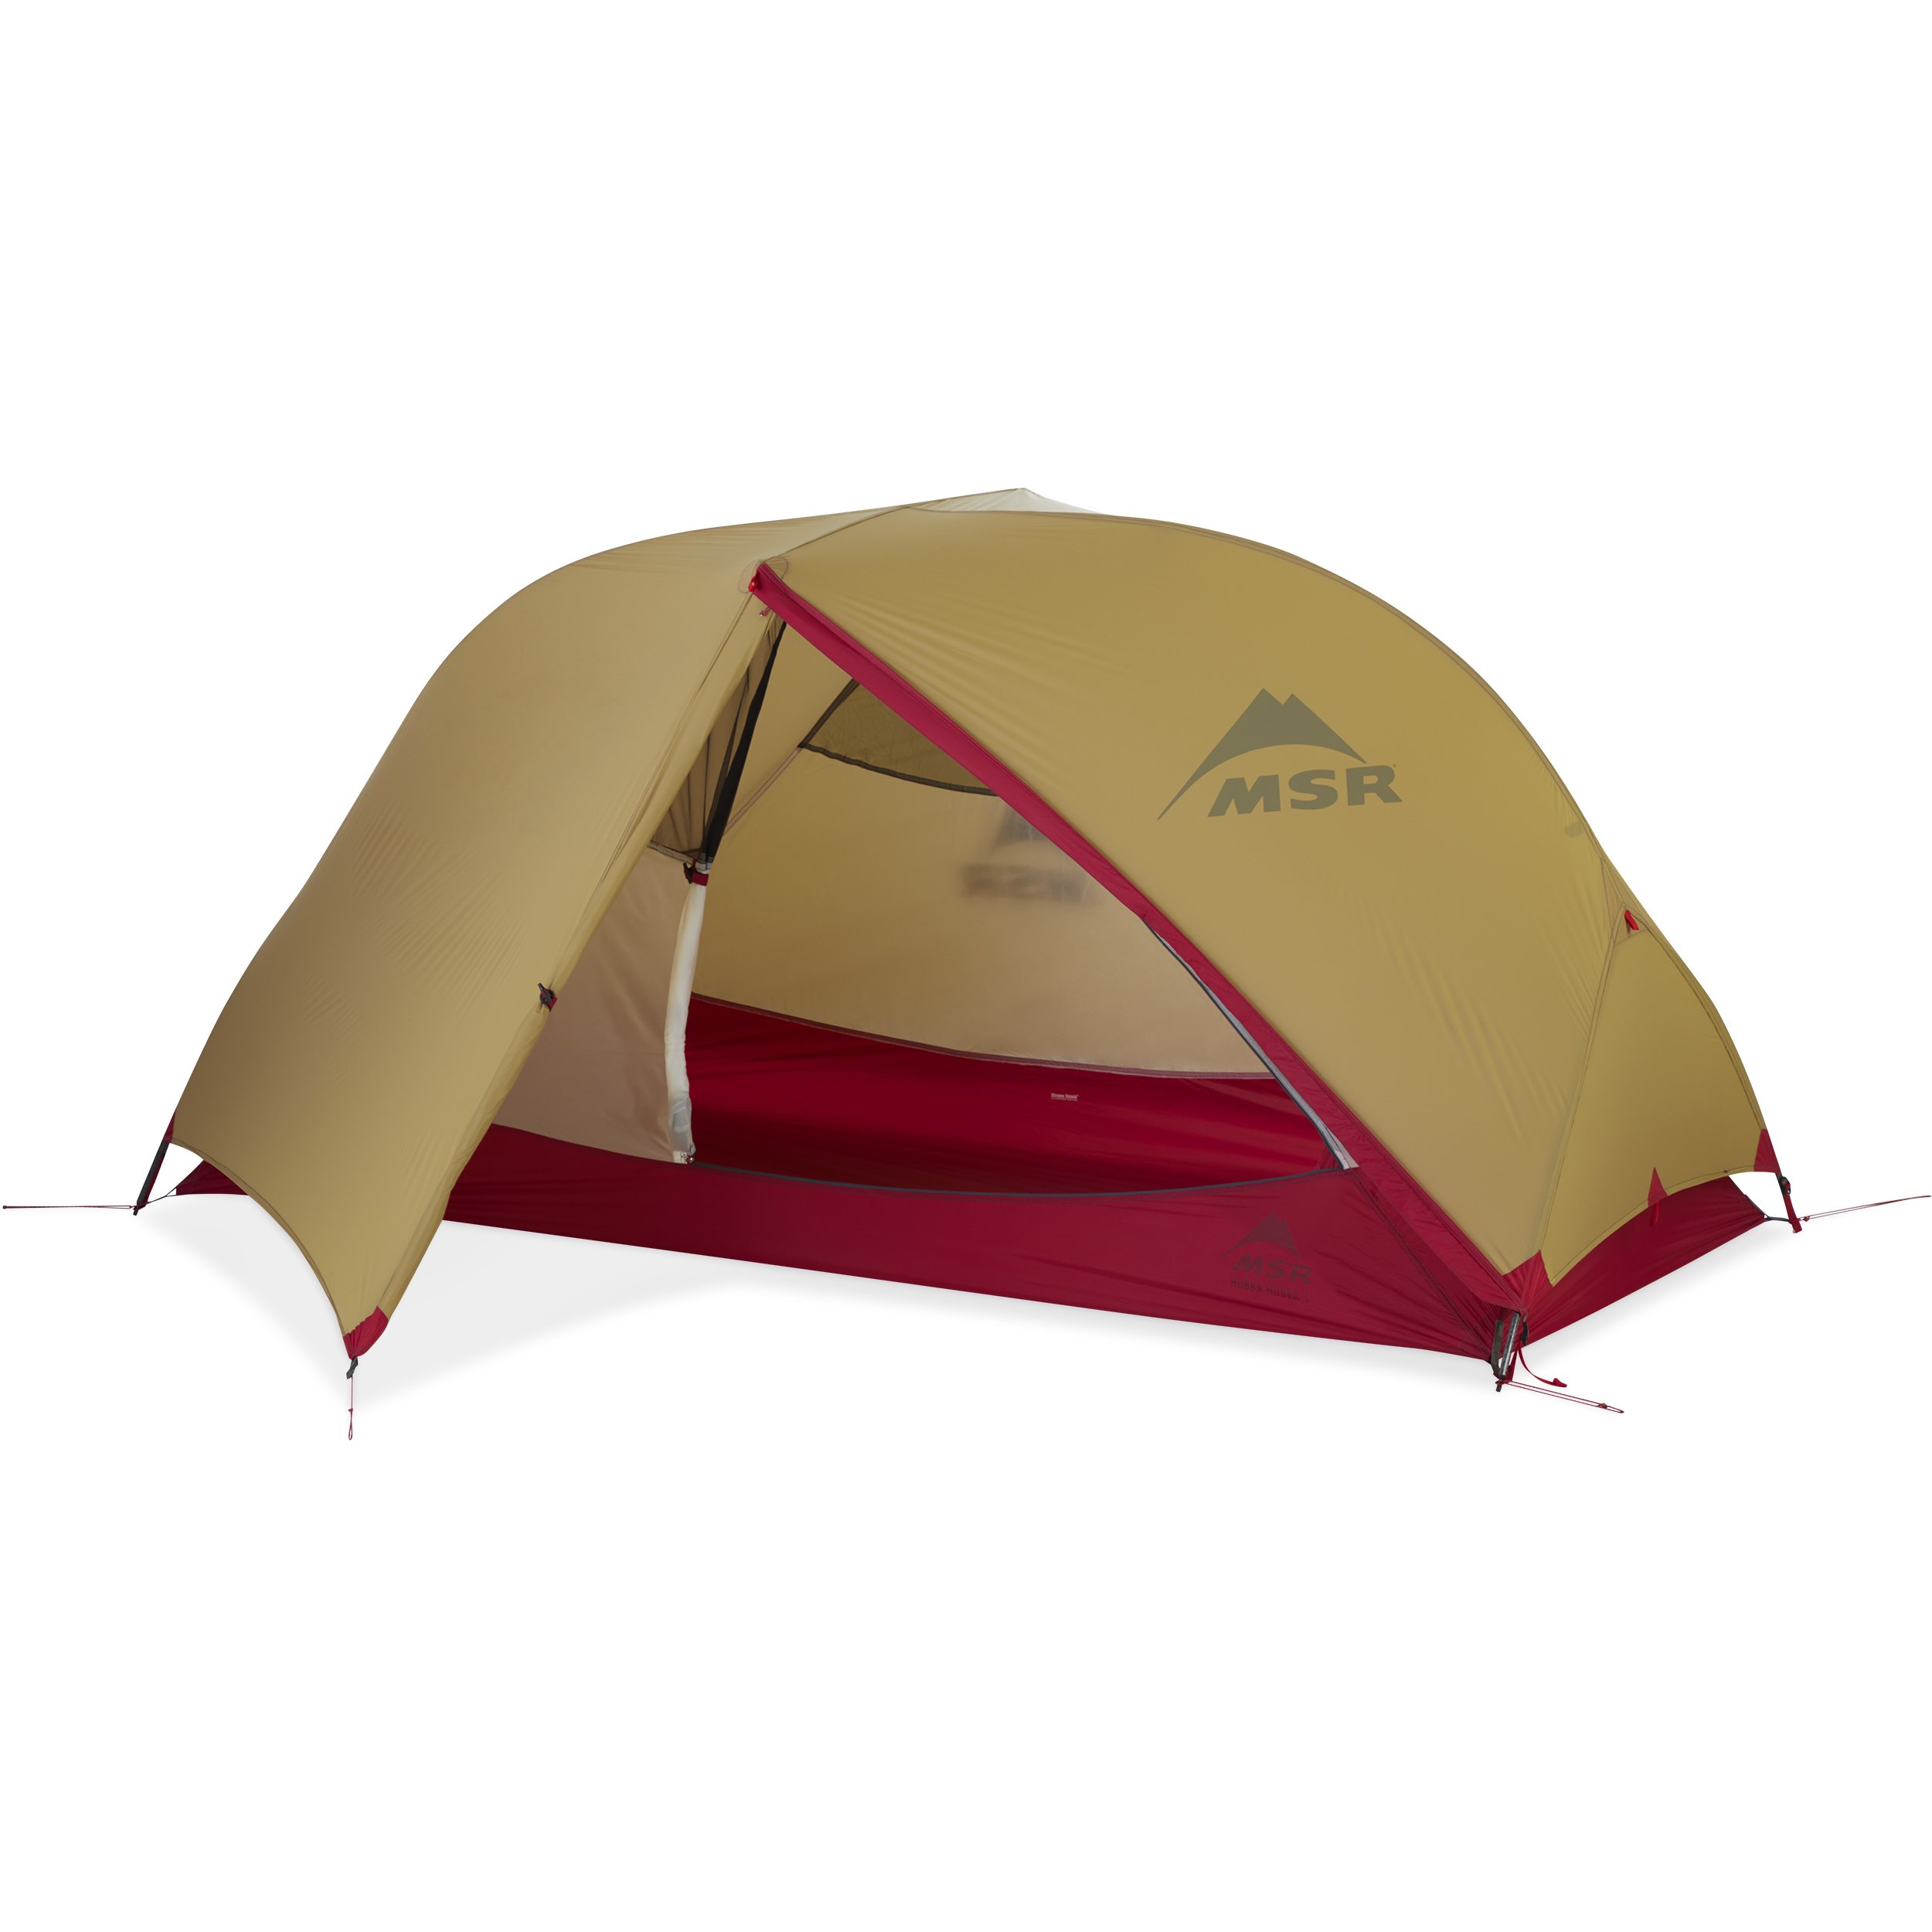 Hubba 1 Legendary Backpacking Tent |